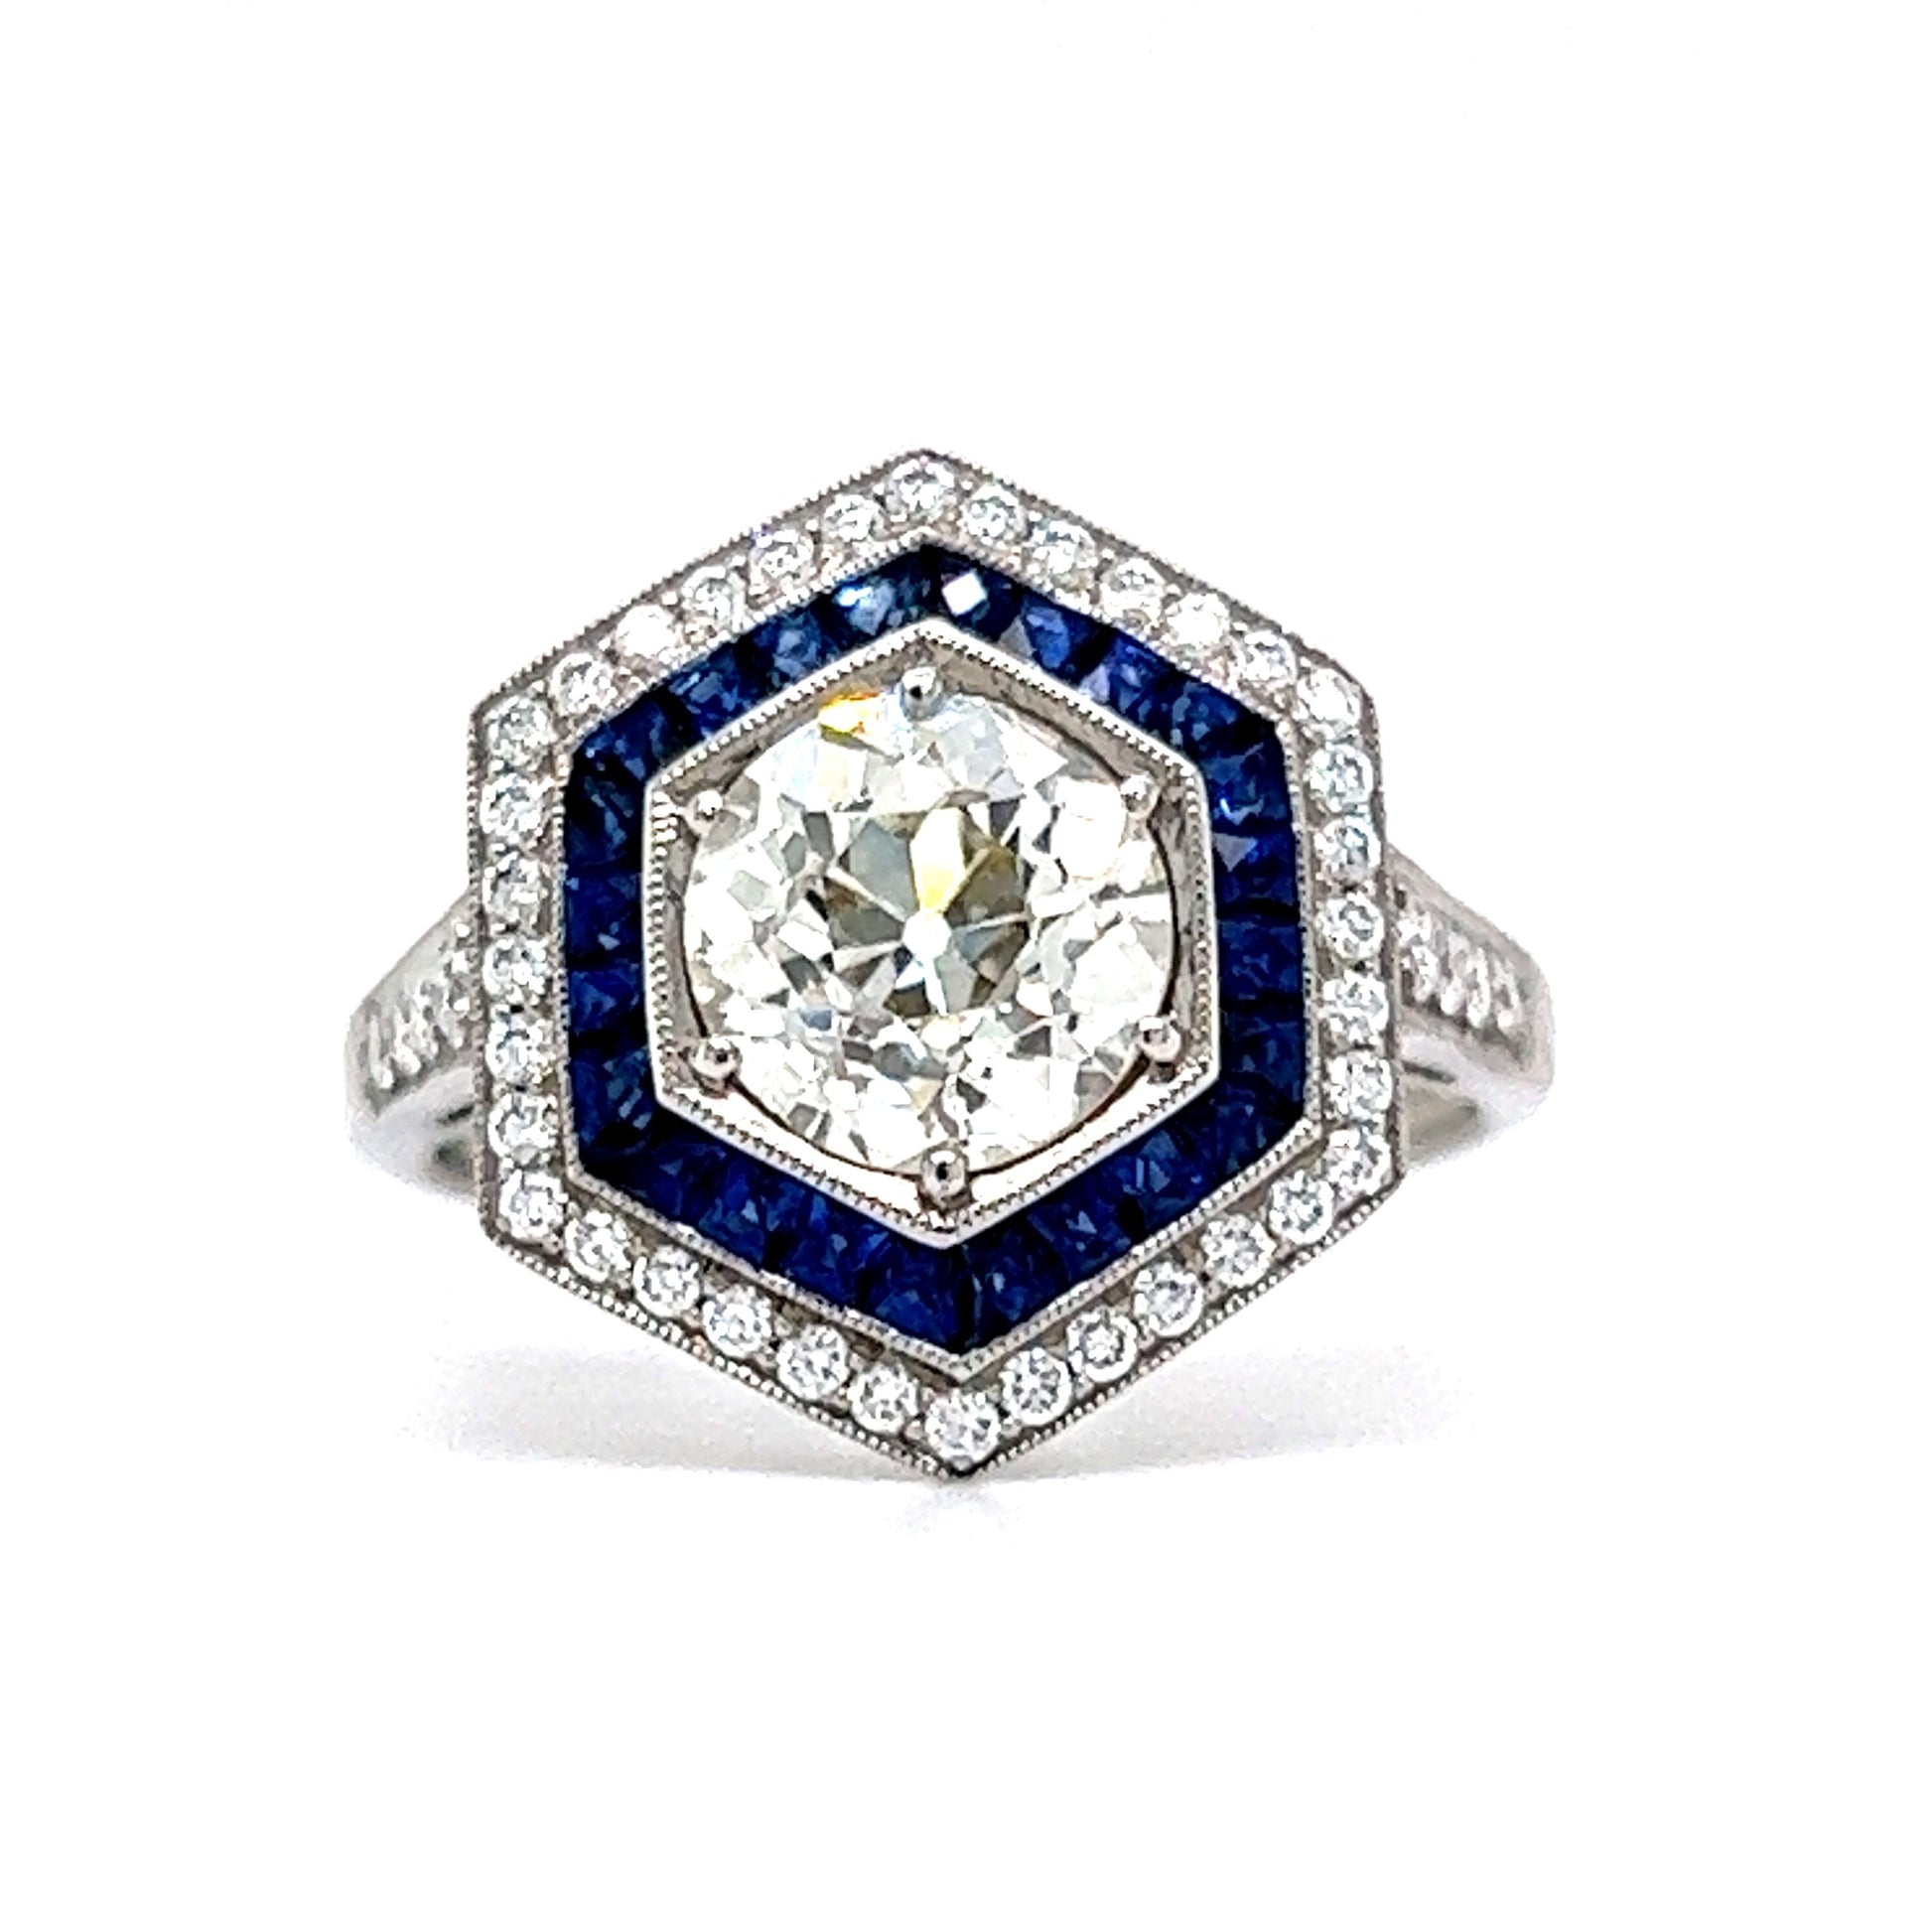 1.51 Hexagon Shaped Diamond & Sapphire Engagement Ring in PlatinumComposition: Platinum Ring Size: 6.5 Total Diamond Weight: 1.81ct Total Gram Weight: 6.3 g Inscription: Pt950 Sophia D.
      